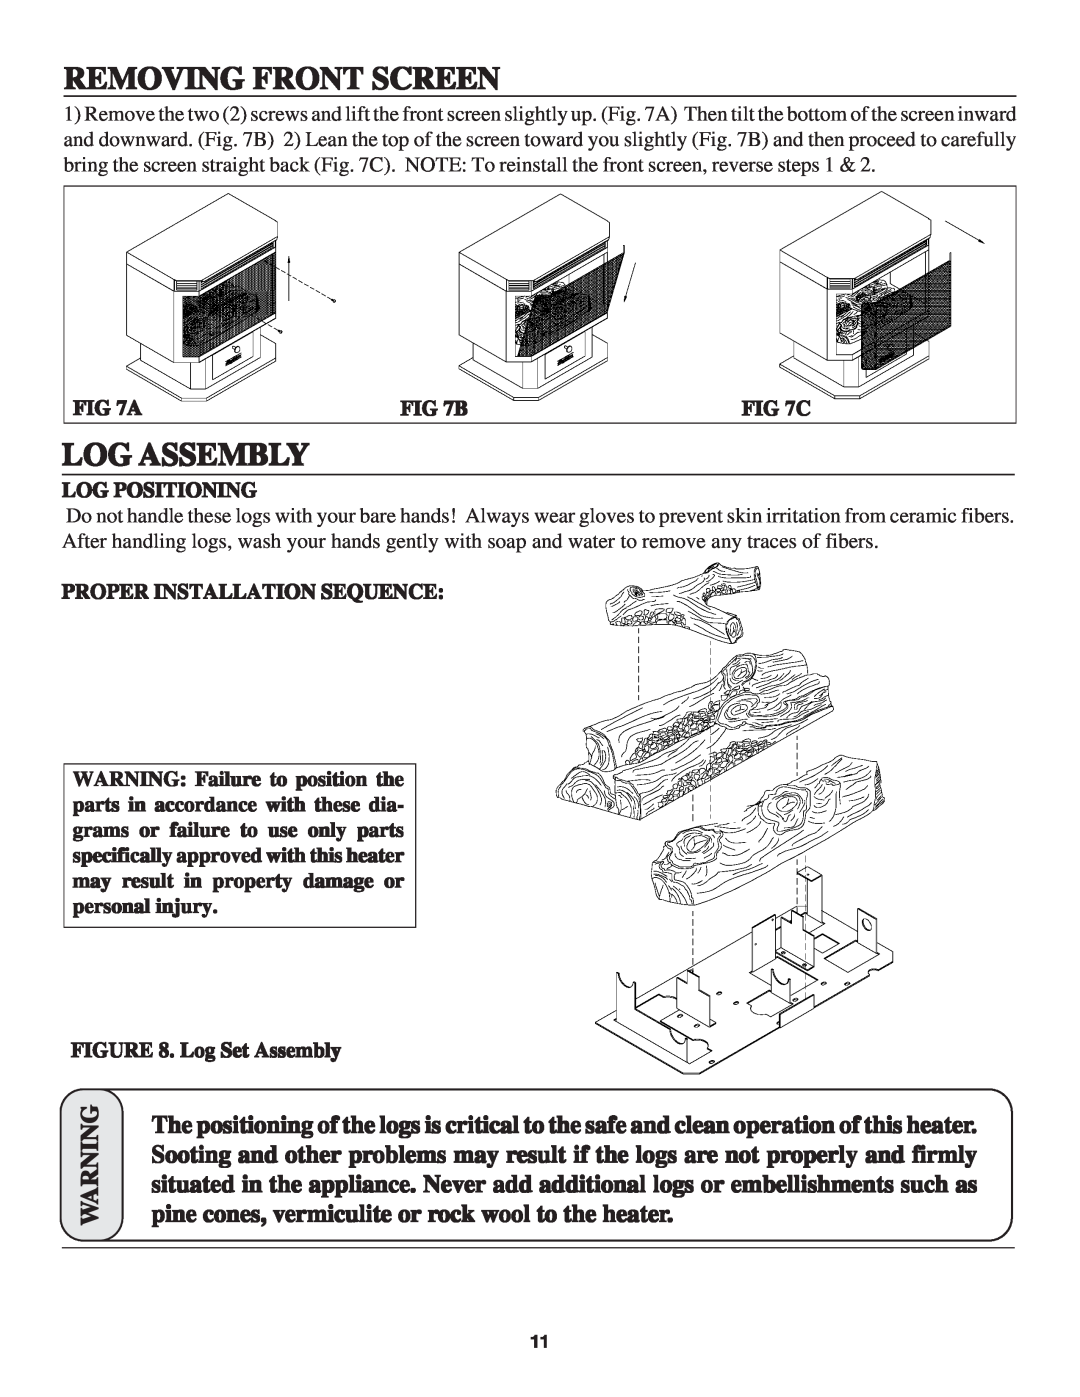 United States Stove B2045N, B2045L Removing Front Screen, Log Assembly, C, Log Positioning, Proper Installation Sequence 